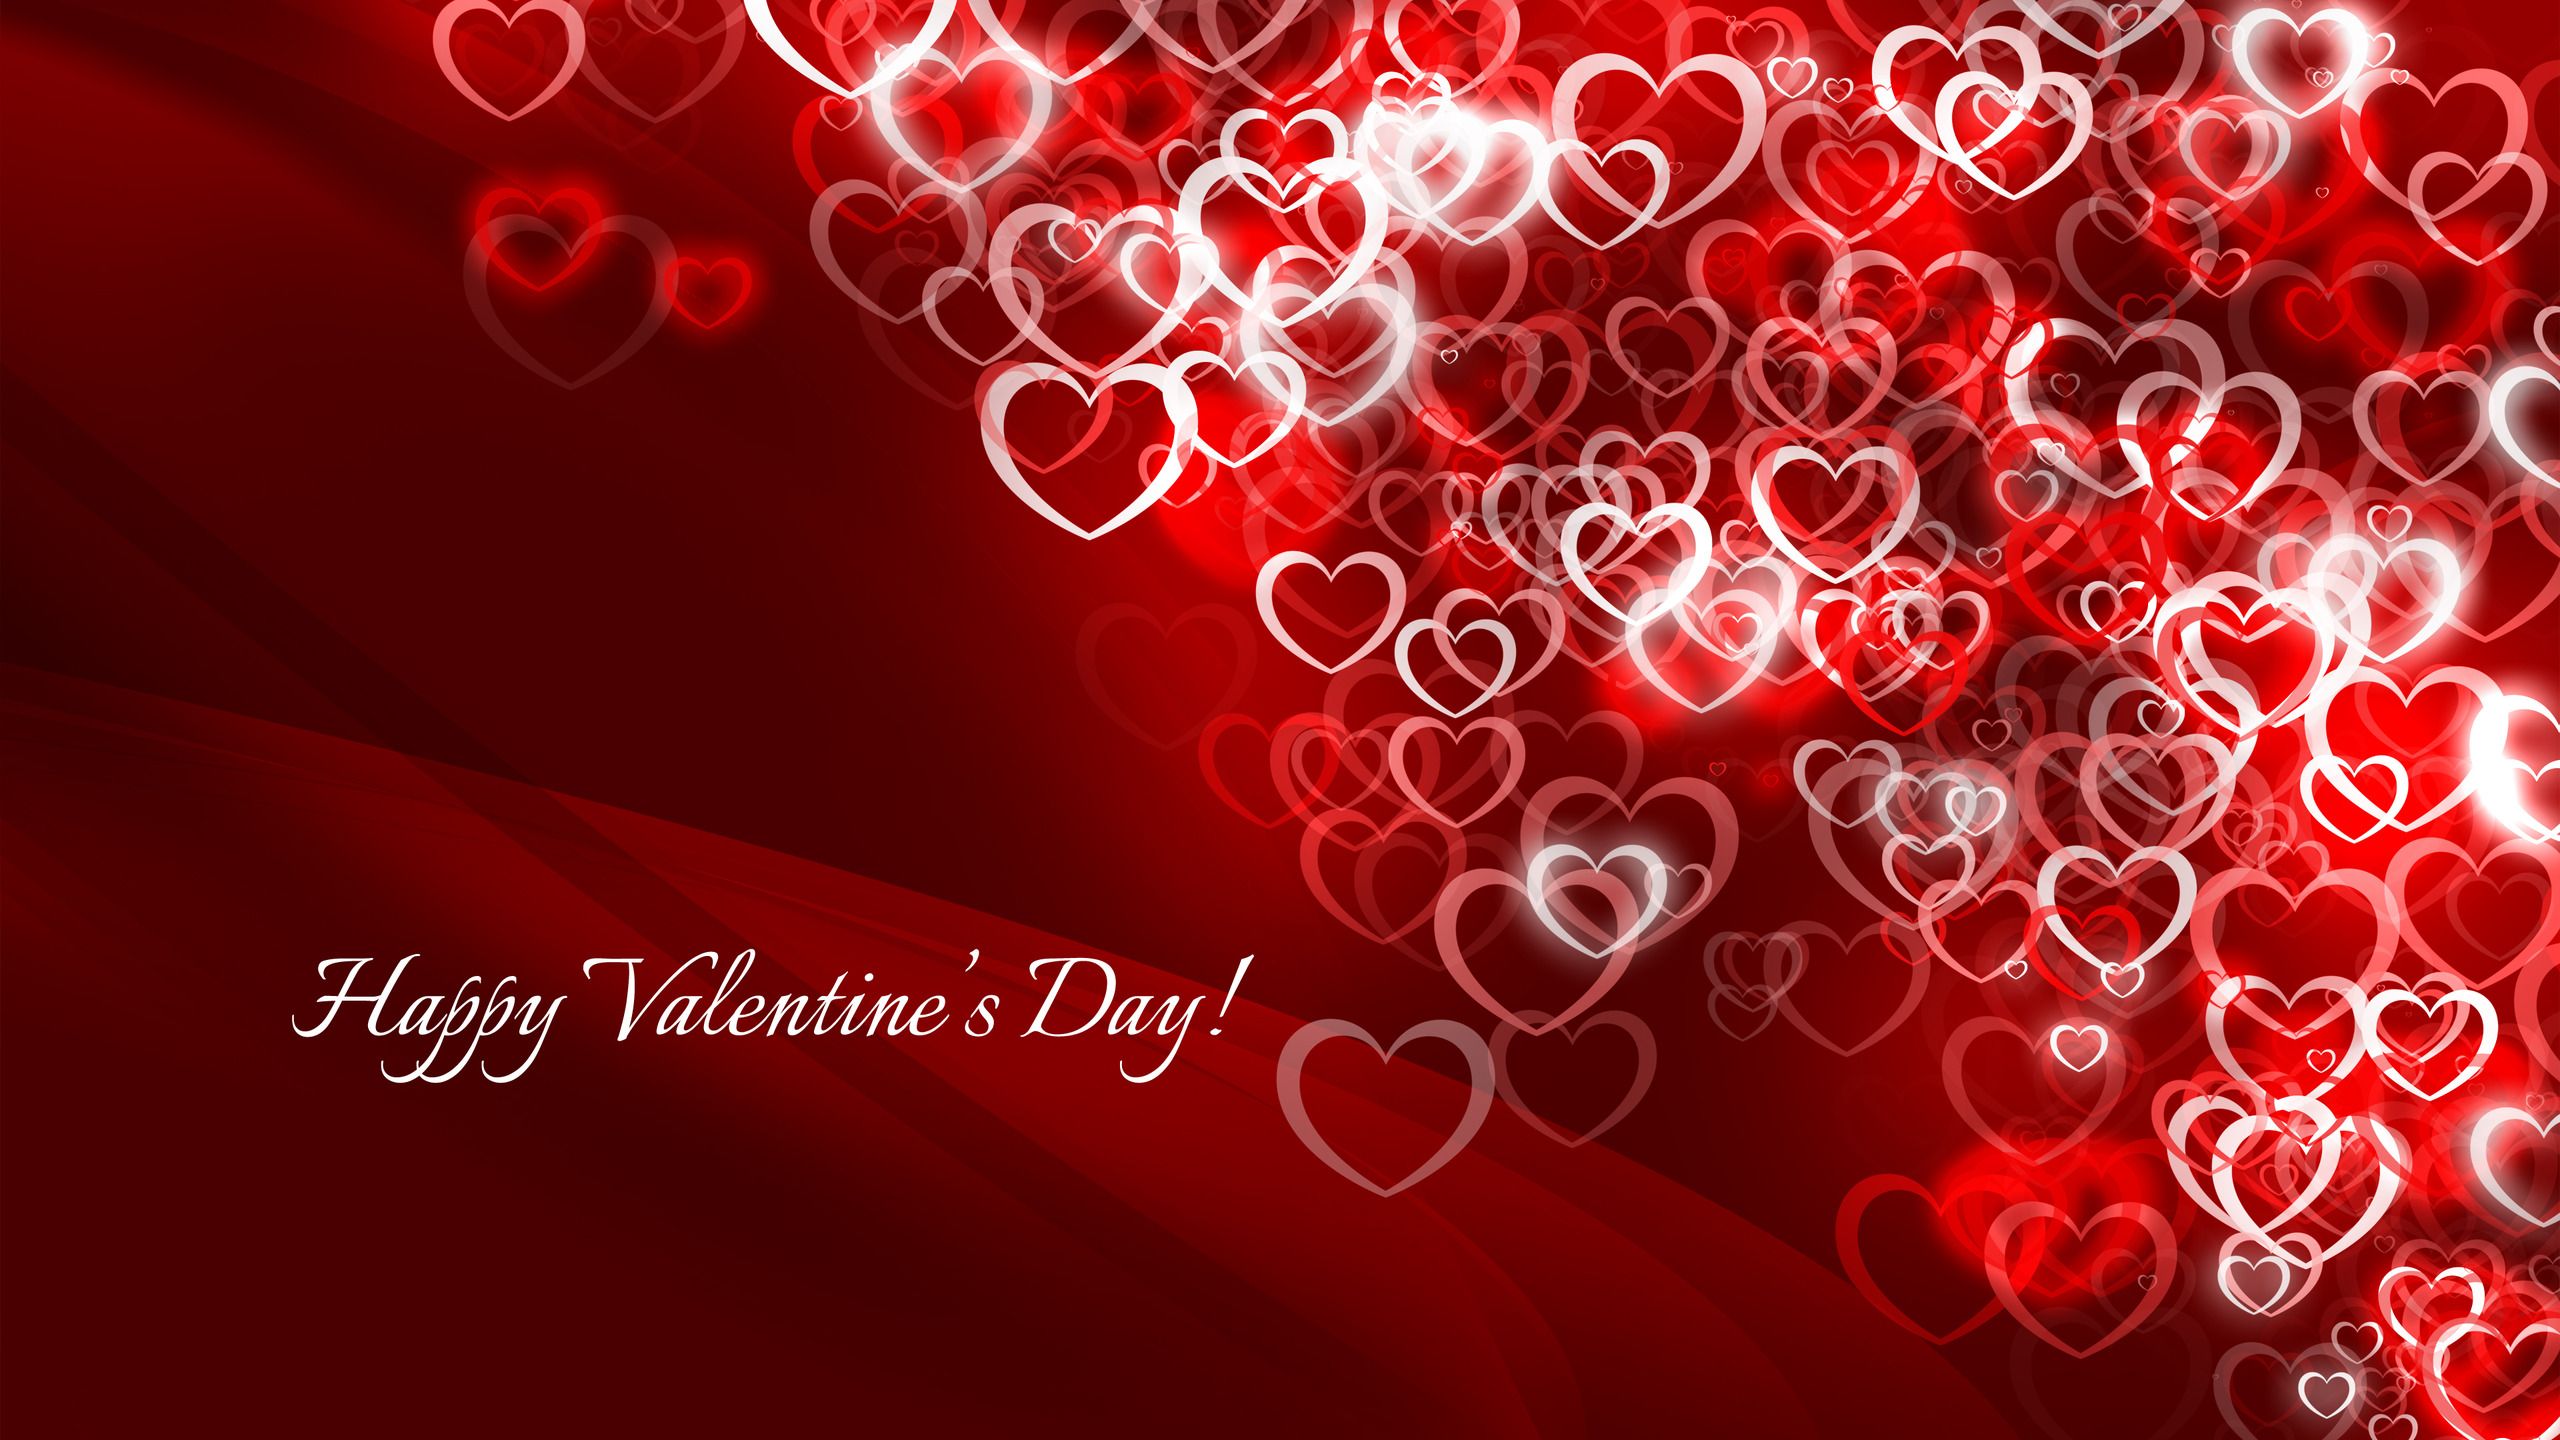 Happy Valentine Day Pictures Wallpaper Hd - Wallpaperforu